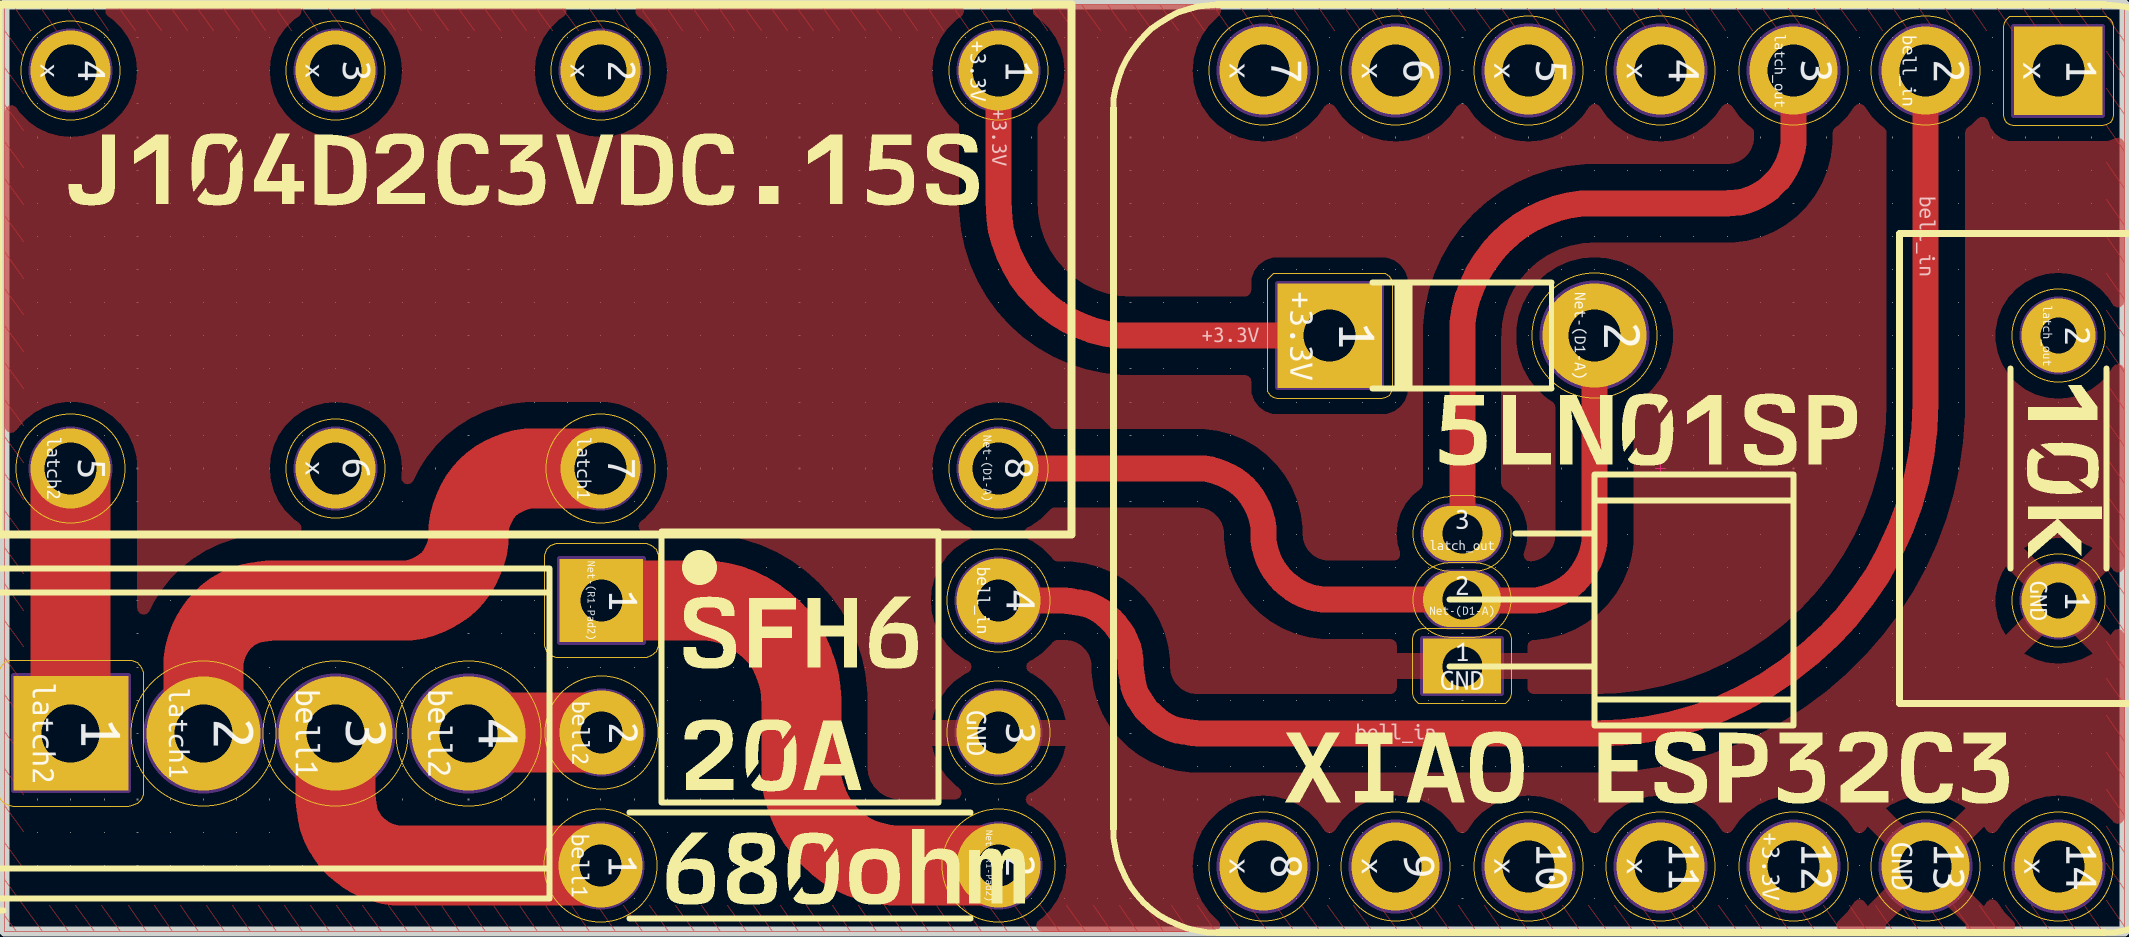 Front of the PCB design